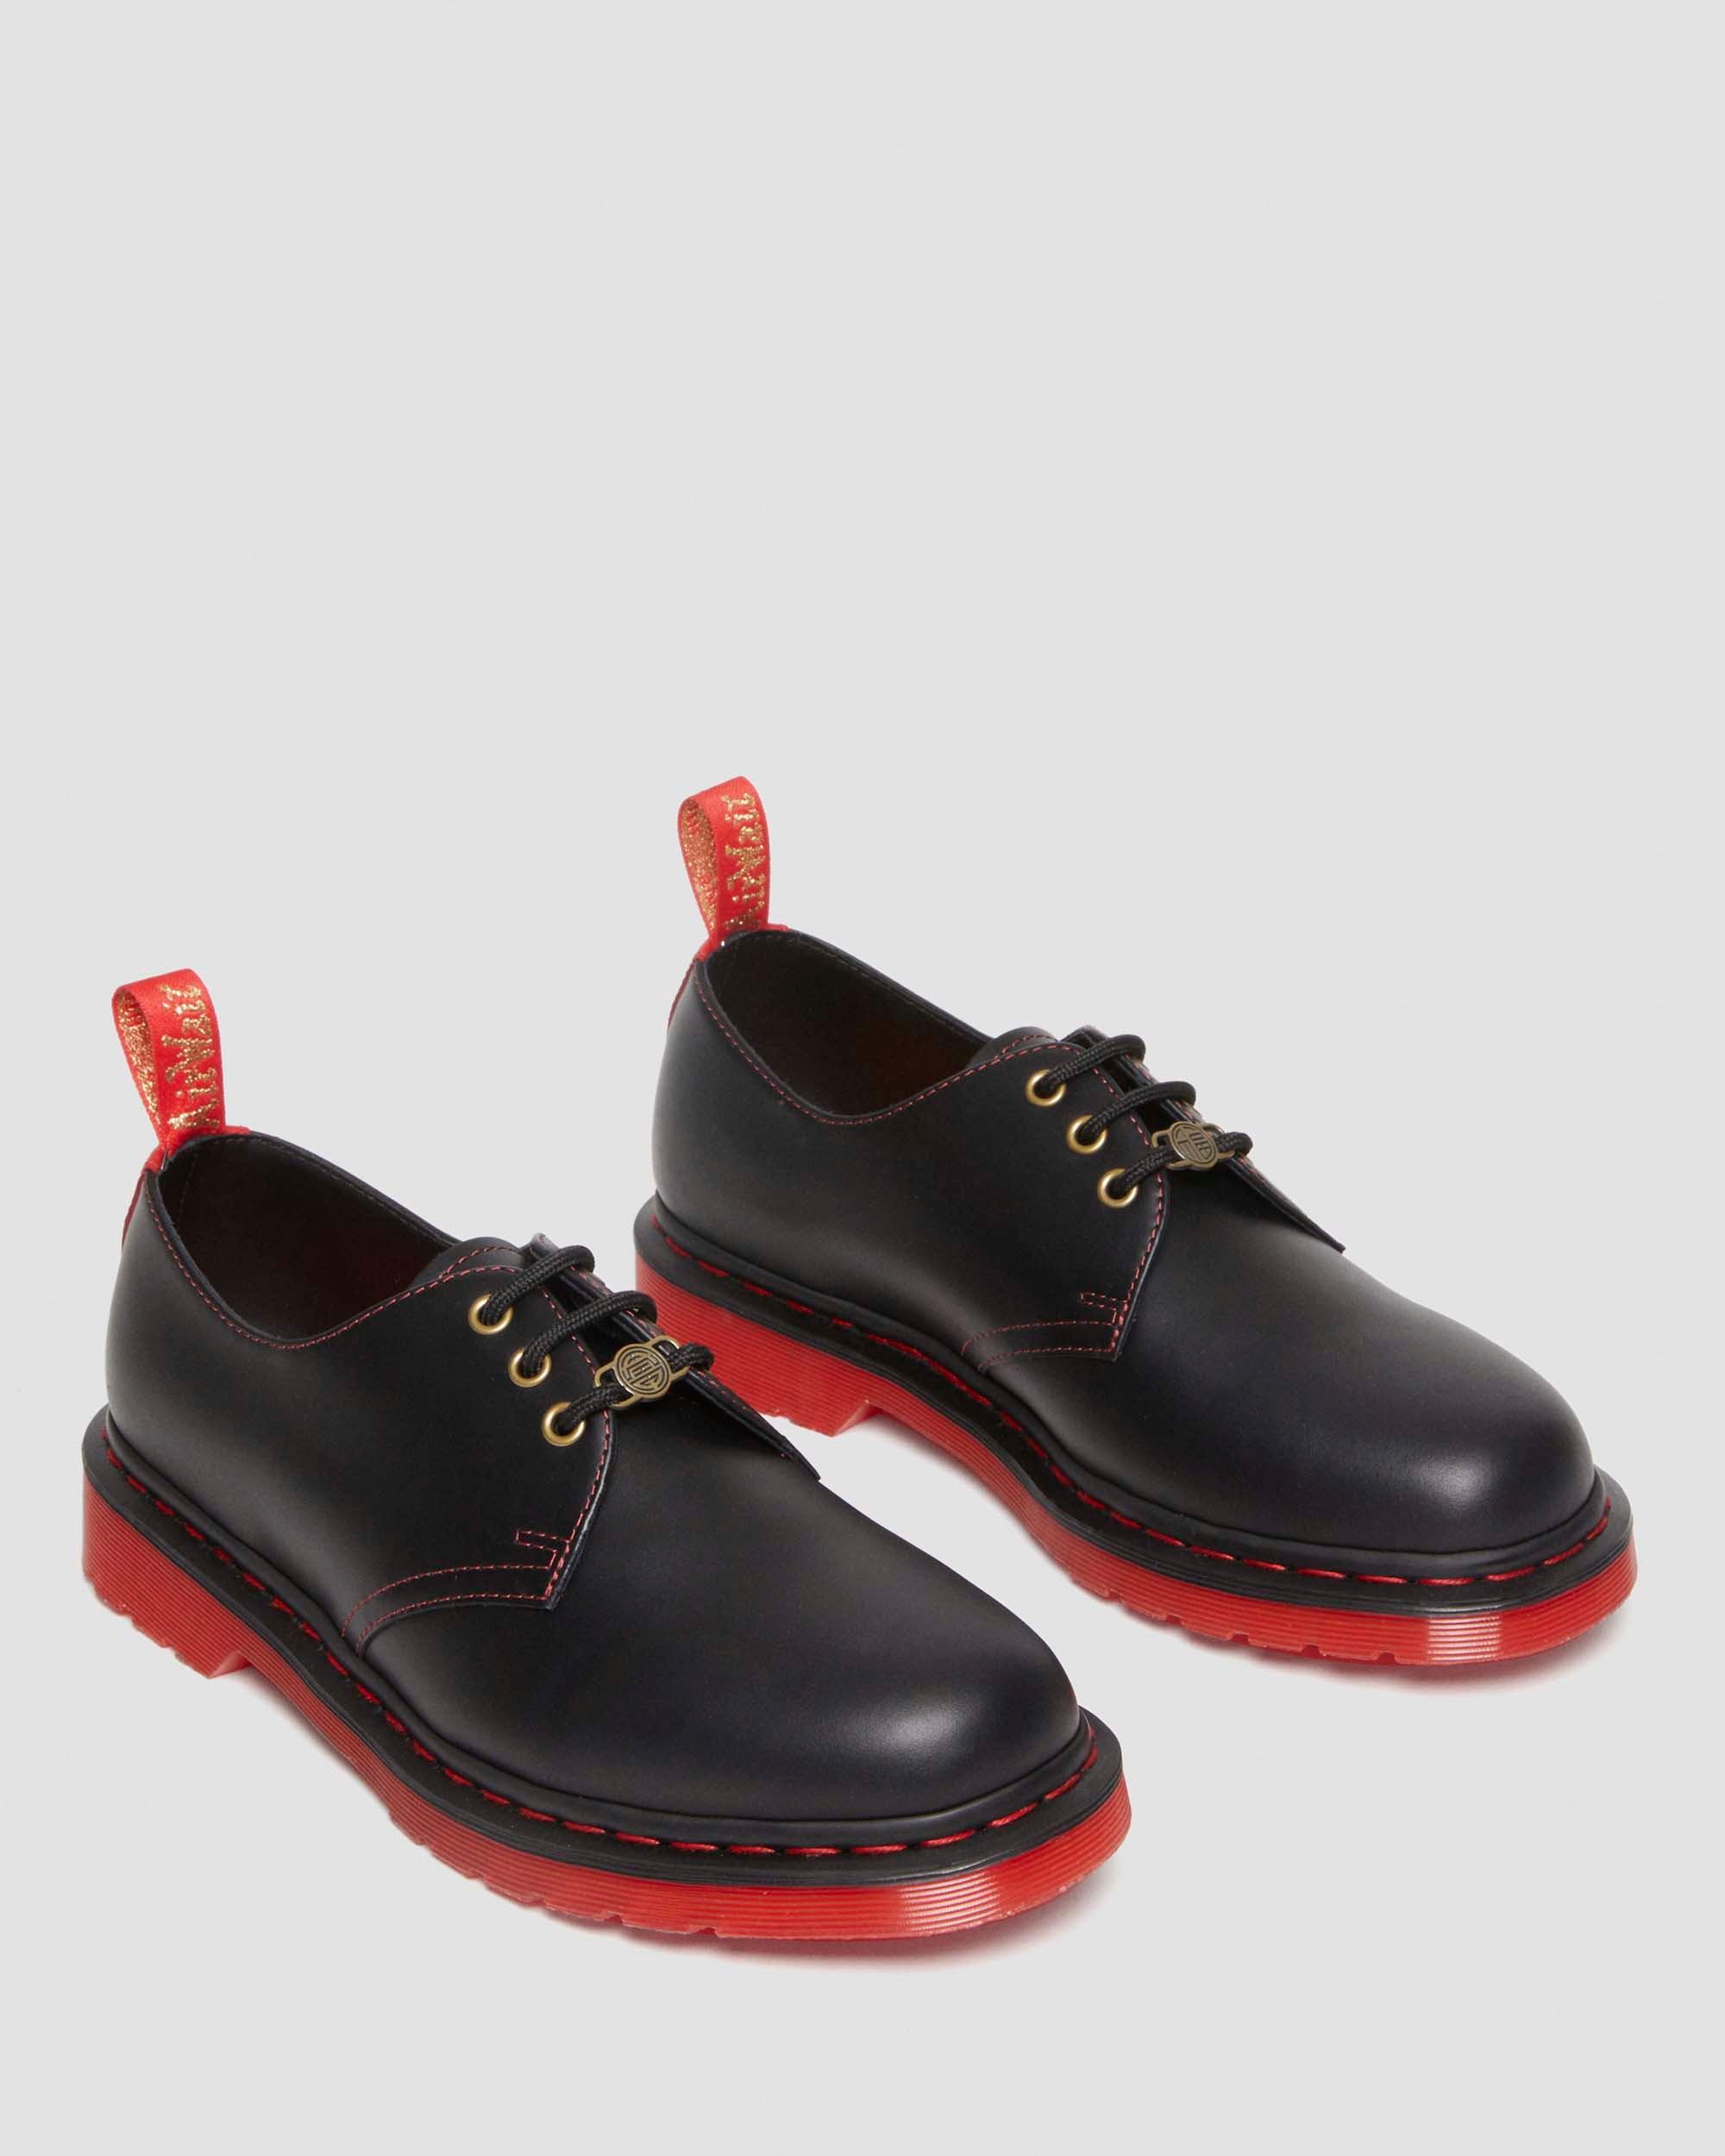 DR MARTENS 1461 Year of The Rabbit Leather Oxford Shoes